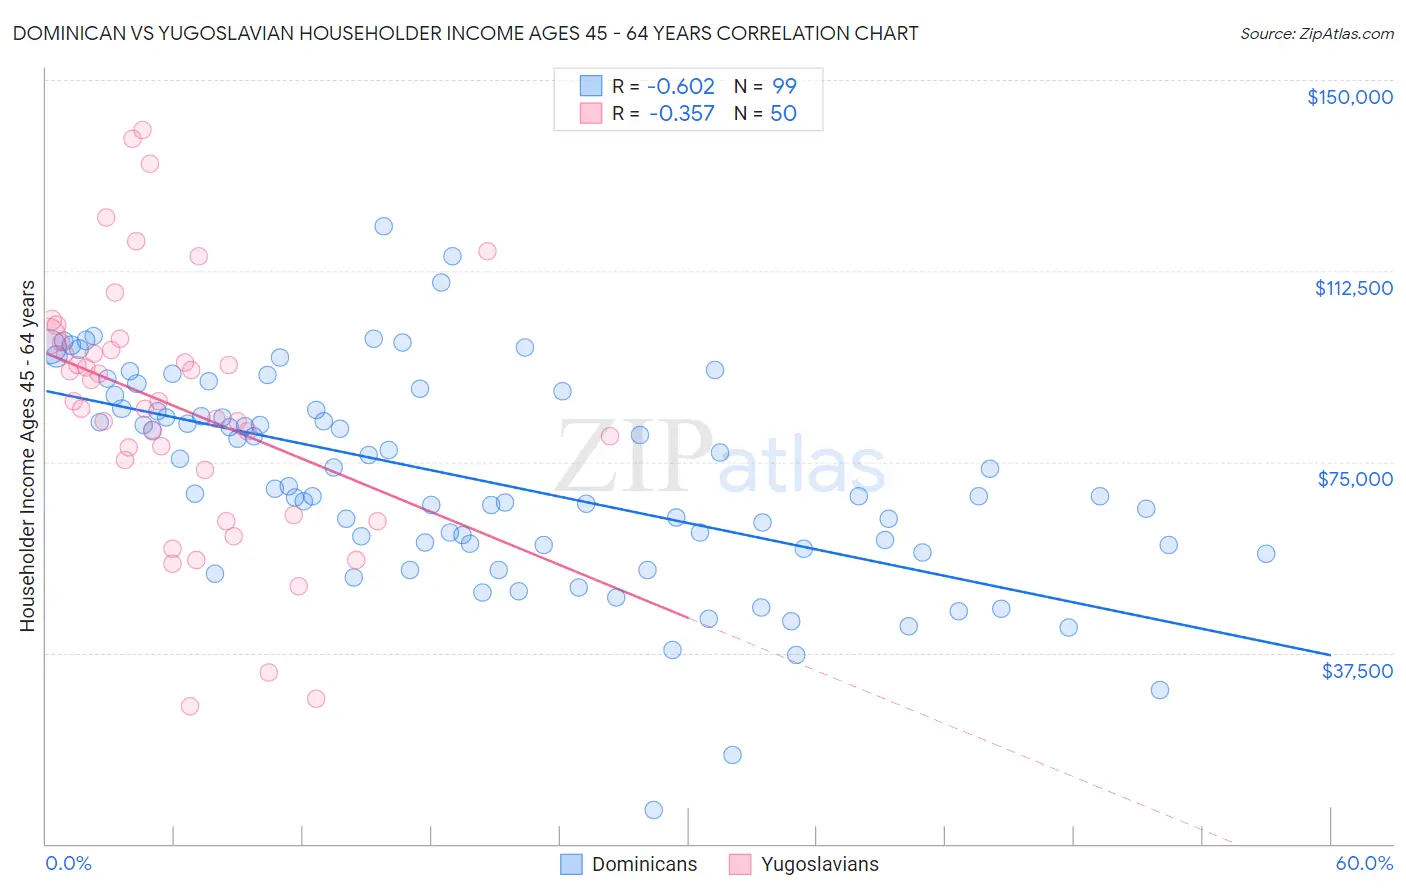 Dominican vs Yugoslavian Householder Income Ages 45 - 64 years